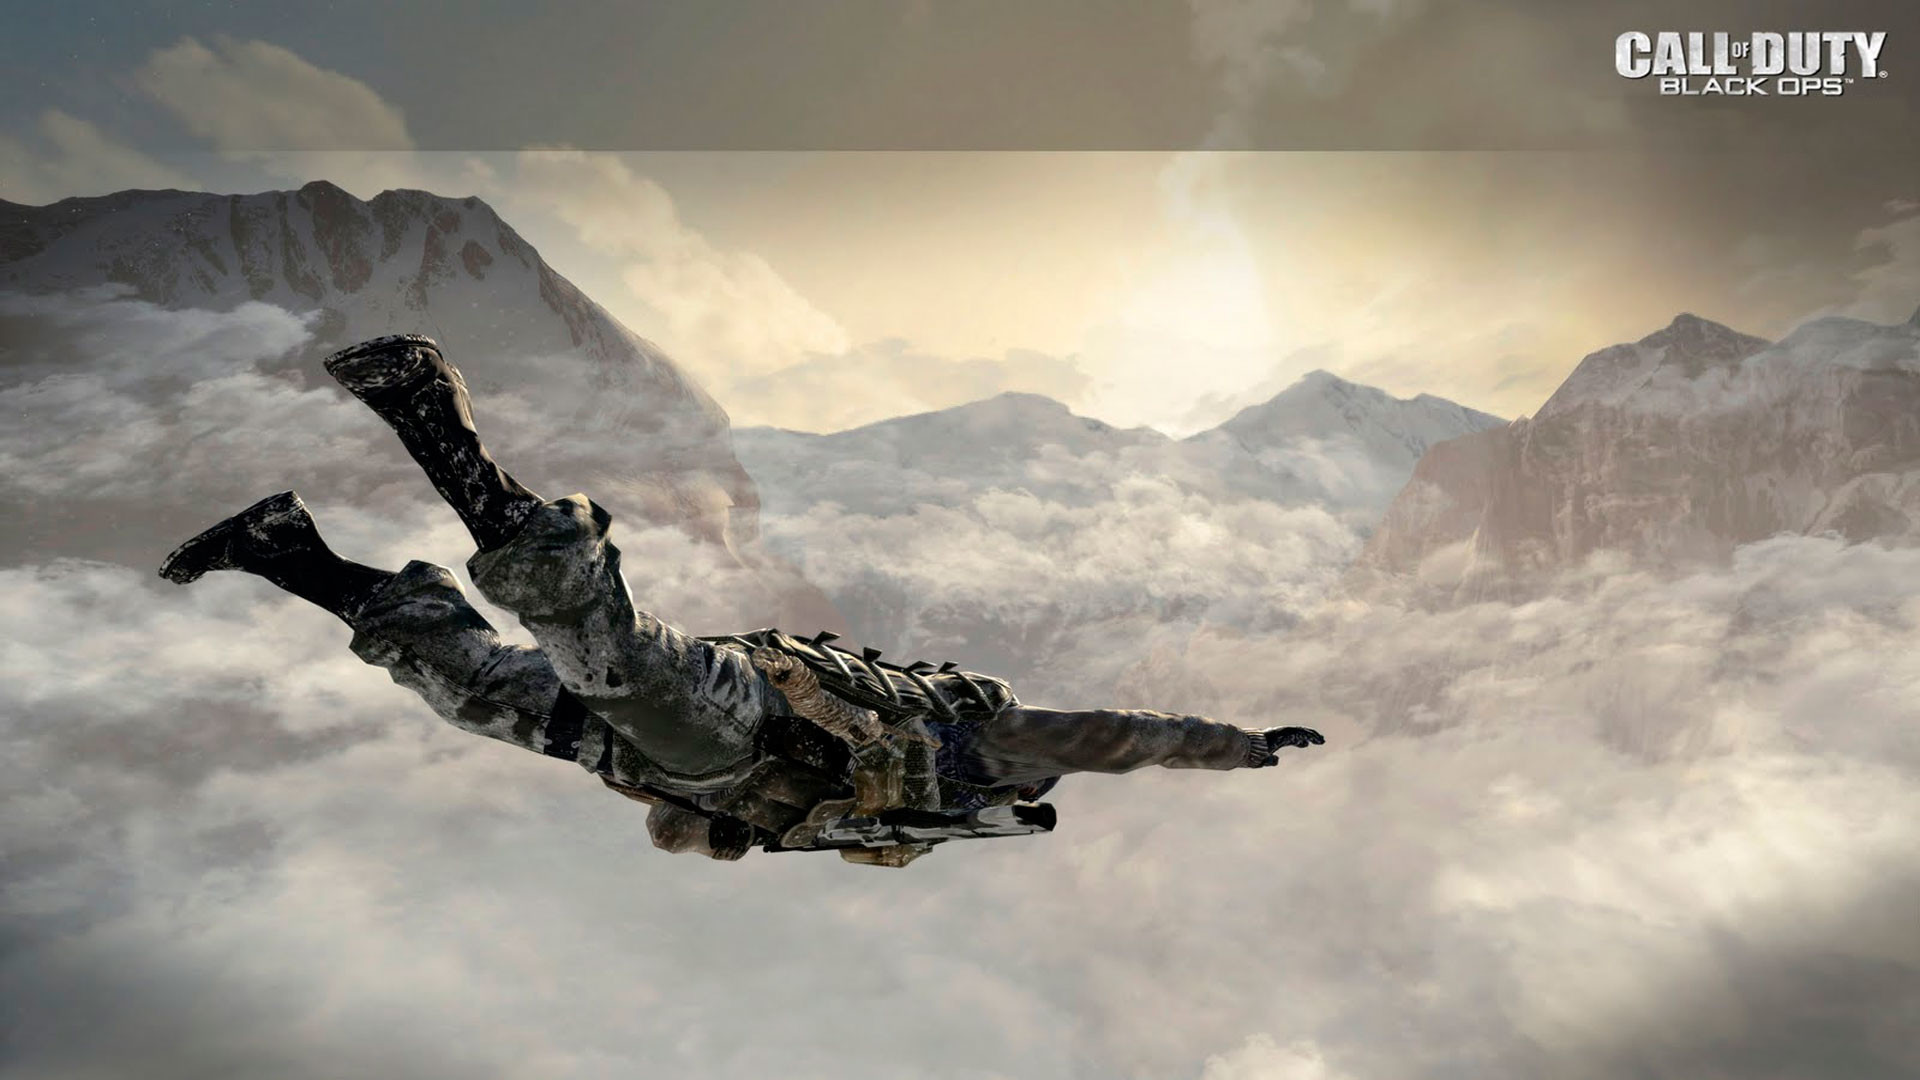 Call of Duty Black Ops 1080p Wallpaper